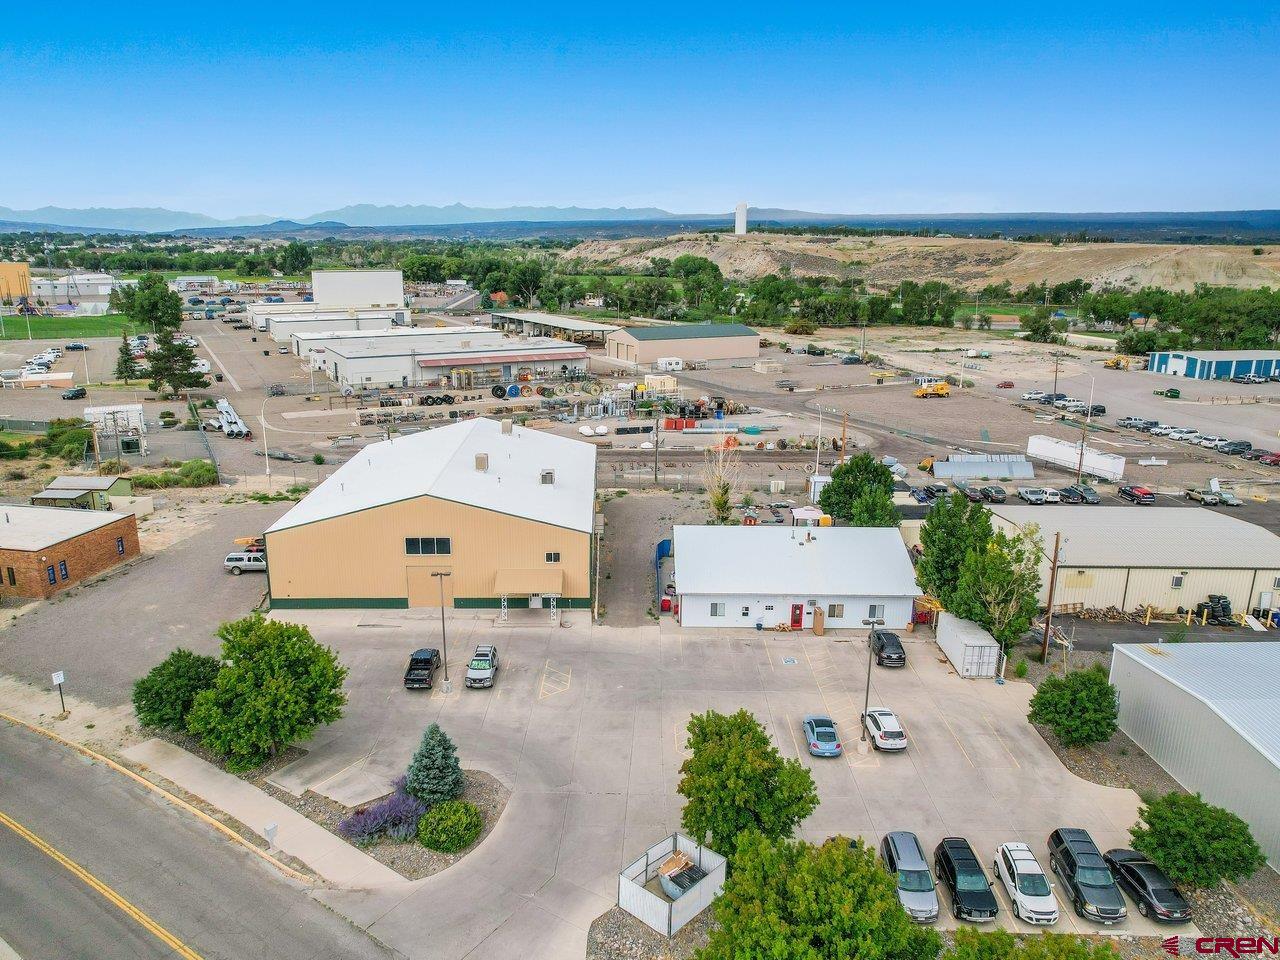 Two buildings totaling 15,850 square feet on 1.13 acres zoned light industrial. Both buildings are occupied now on short termleases. The property is located near the new Colorado Outdoors development. Showing by appointment only - do not disturbowner. Contact agent with questions and to set appointment.